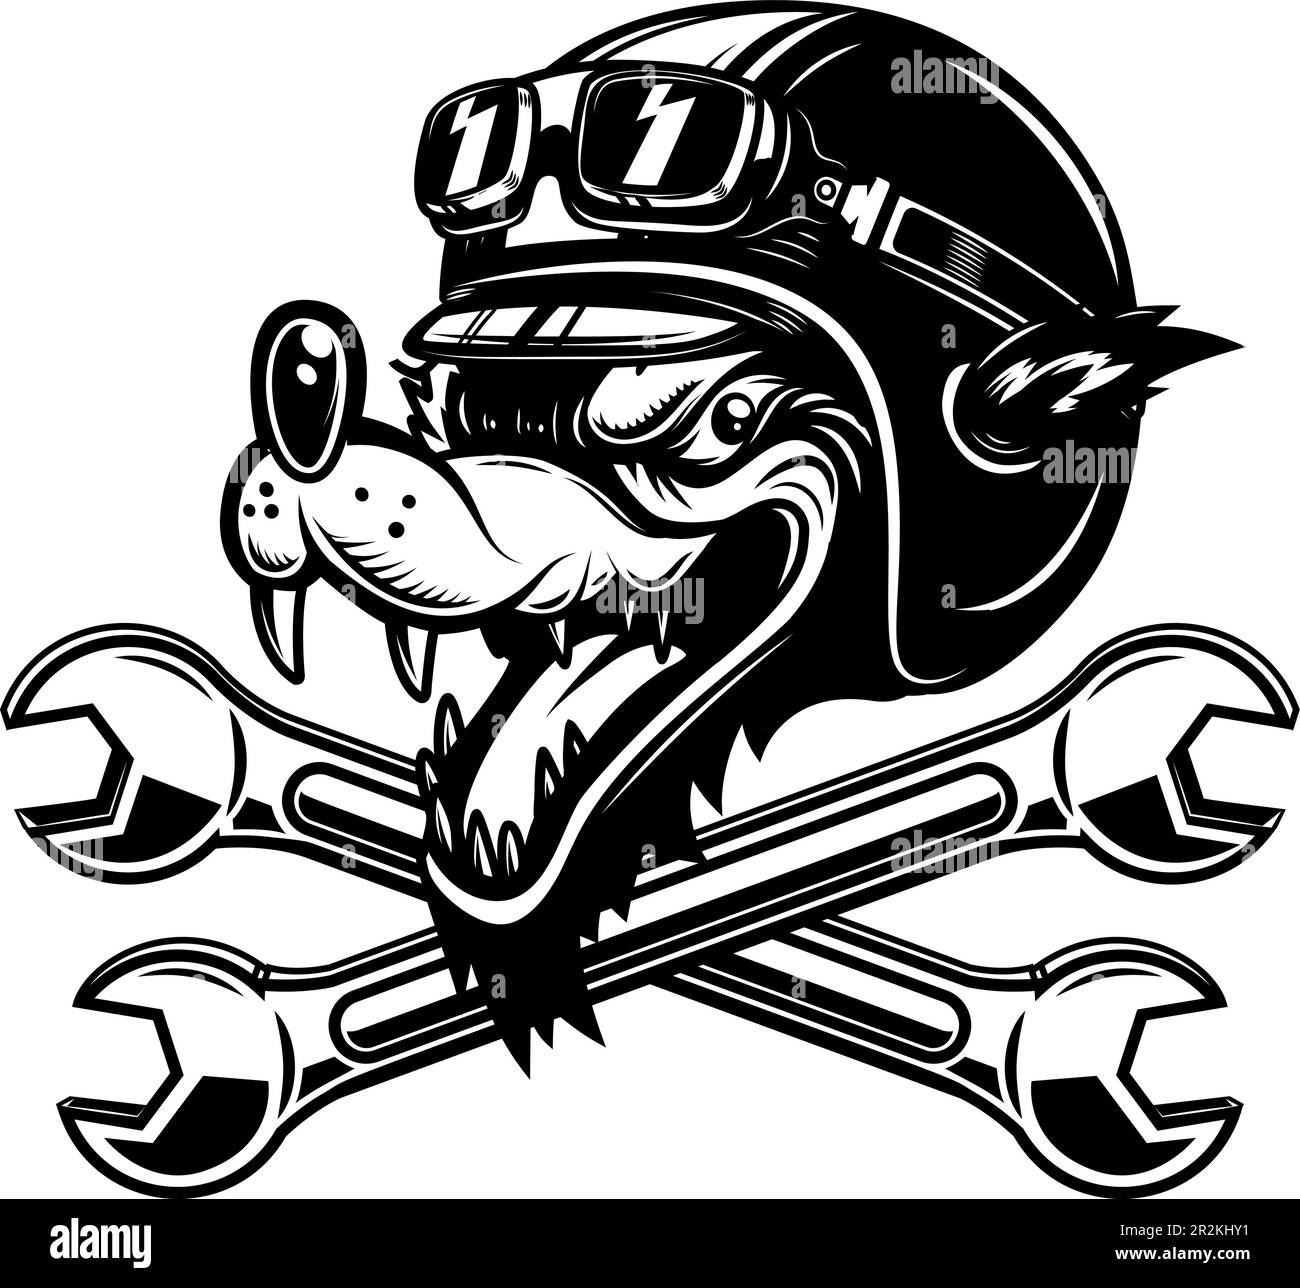 Illustration of the wolf racer with crossed wrenches. Design element for logo, label, sign, emblem. Vector illustration, Illustration of the wolf race Stock Vector